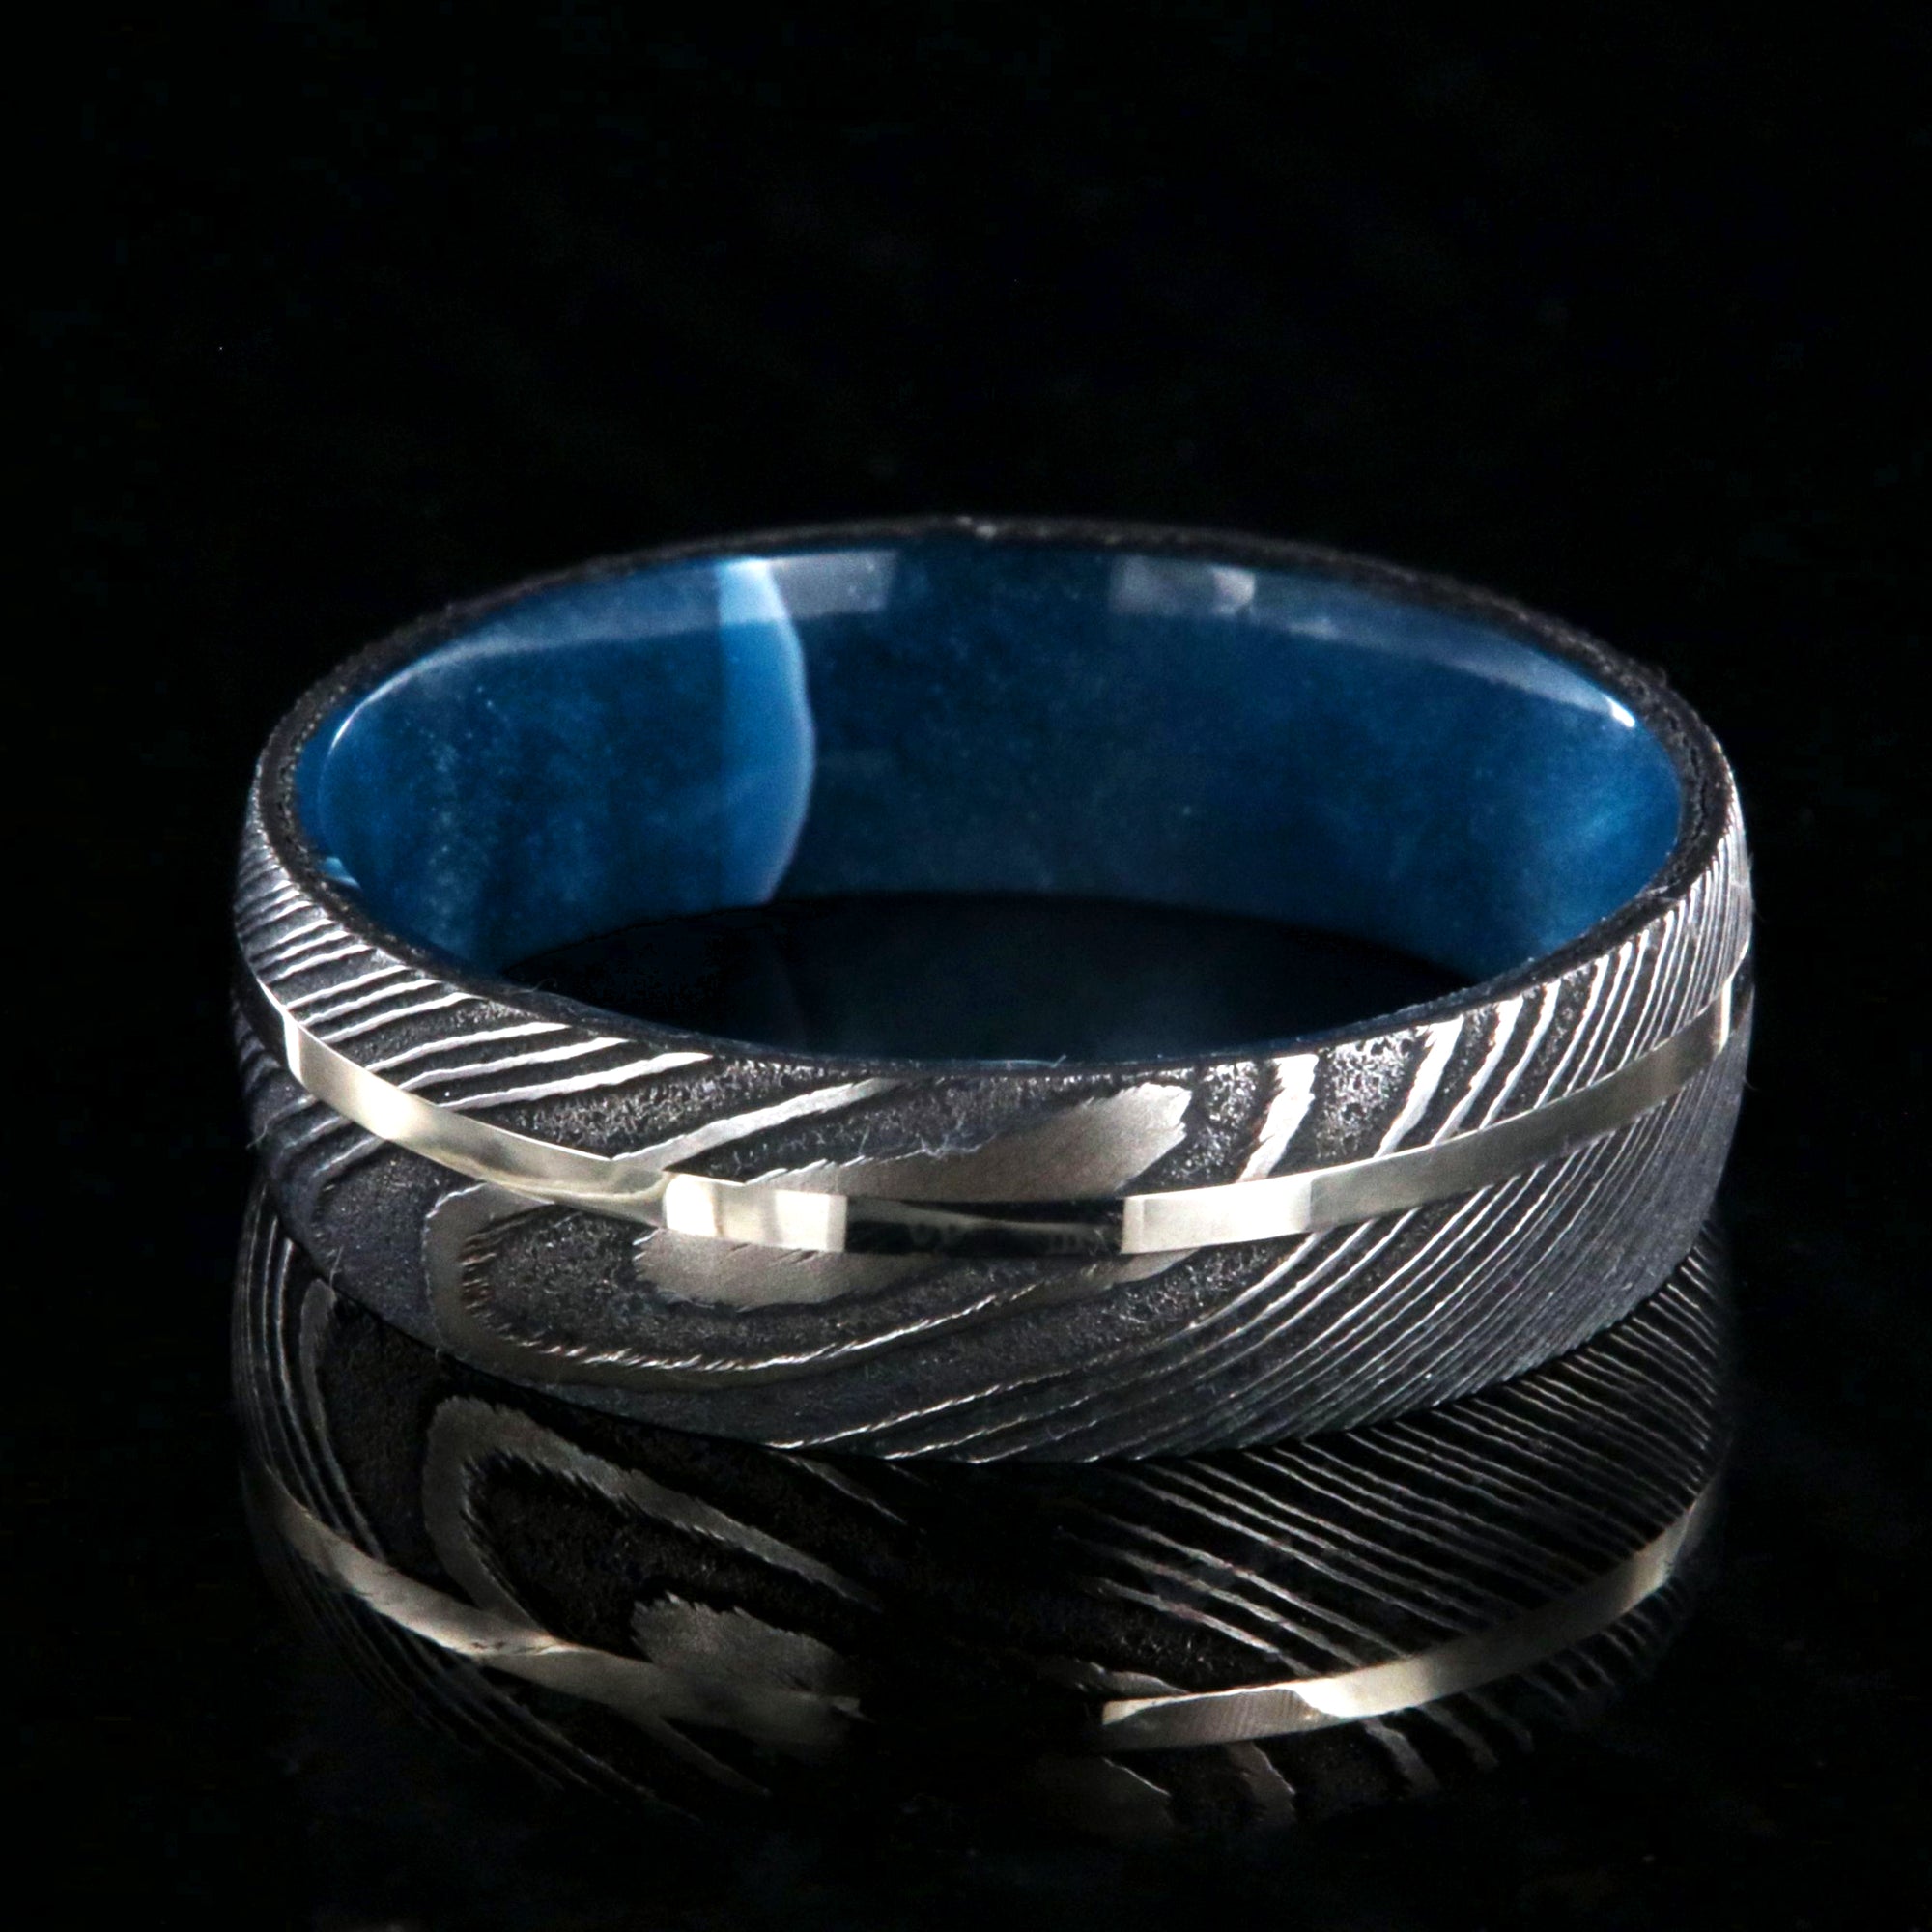 8mm wide black Damascus steel ring with a swirled blue acrylic sleeve and white gold inlay